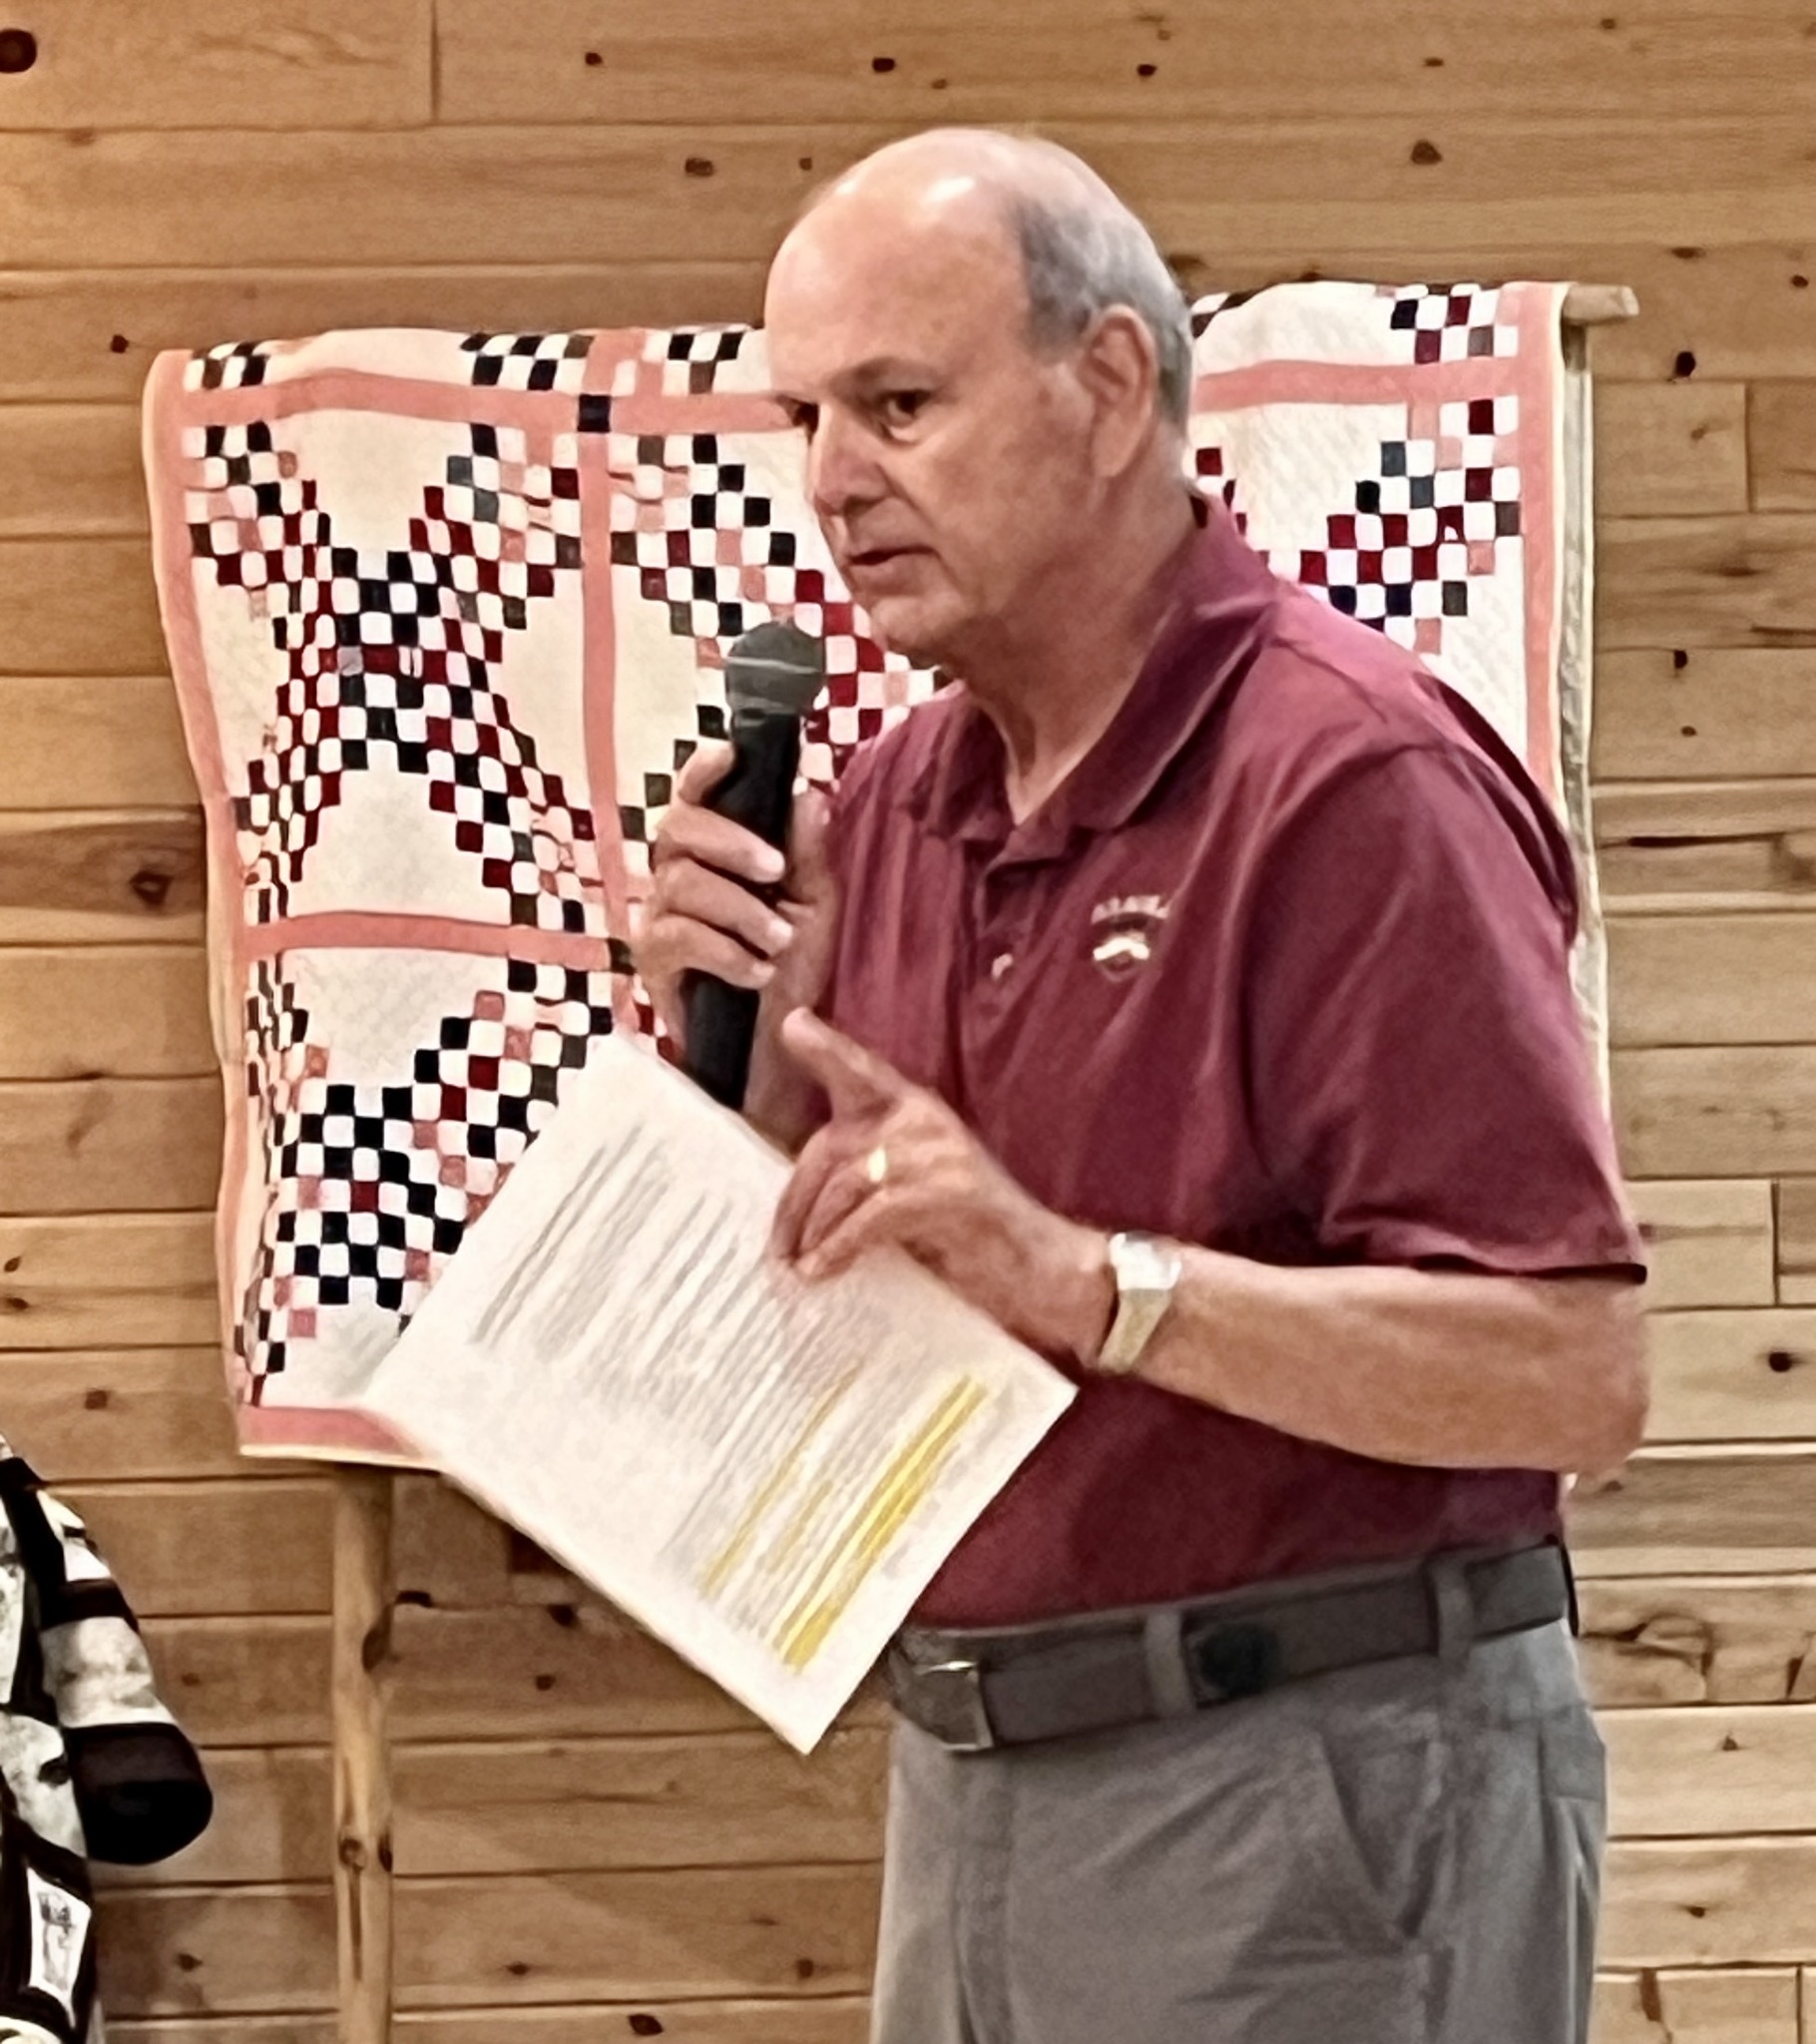 Lee Mindemann, a resident of neighboring Star Lake, gave a presentation of invasive species to the lakes.